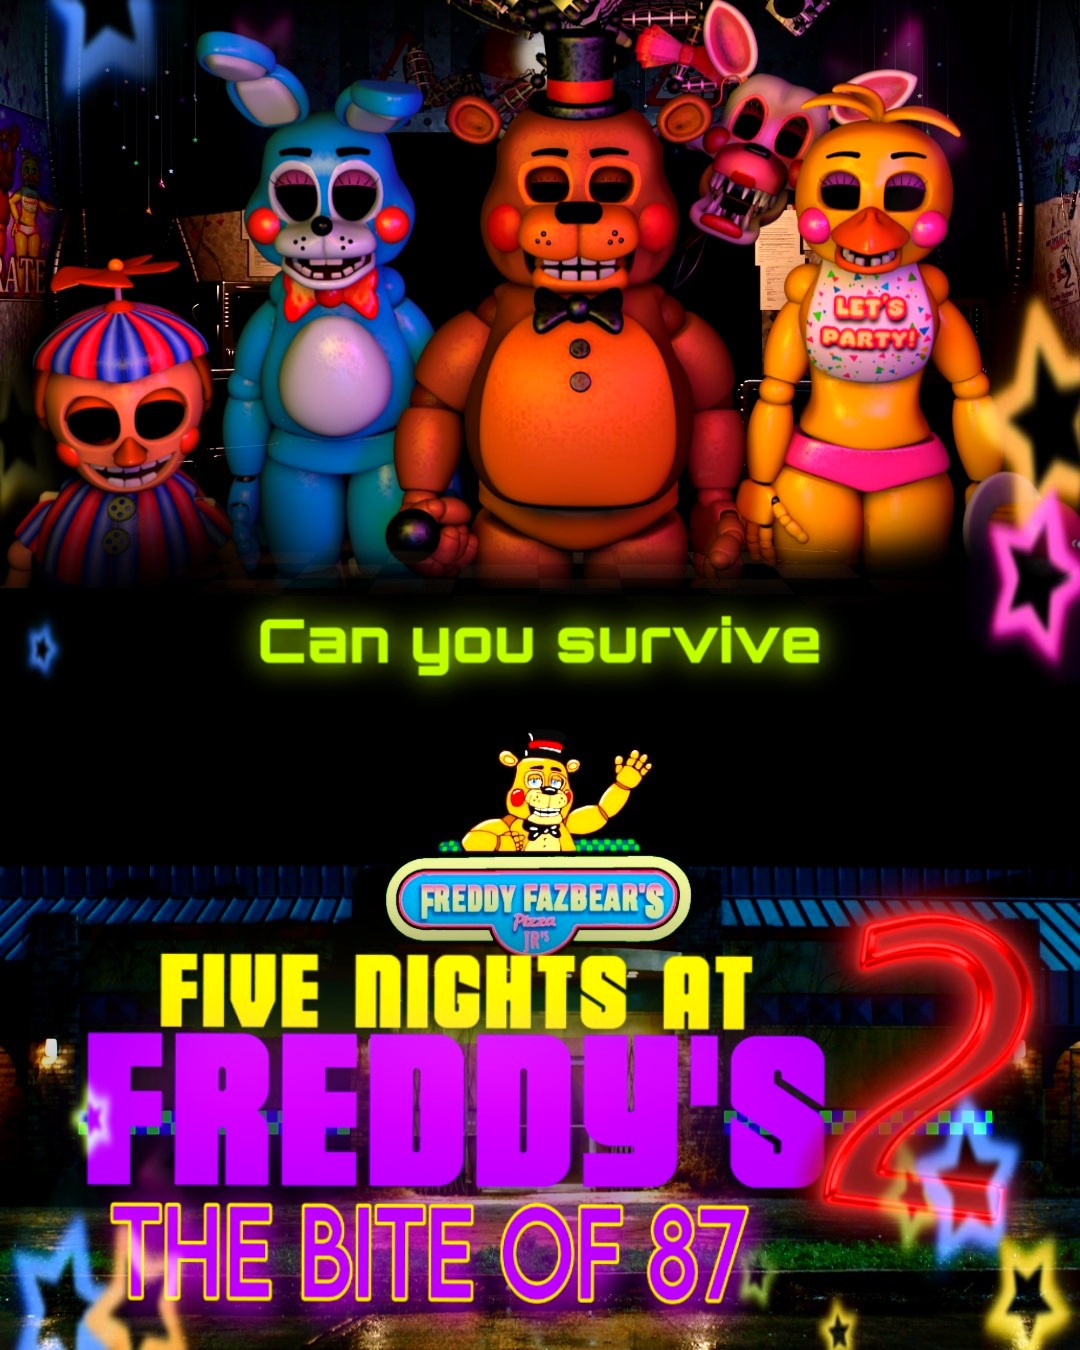 Five Nights At Freddy's 2 MOVIE POSTER by donko0ffical on DeviantArt